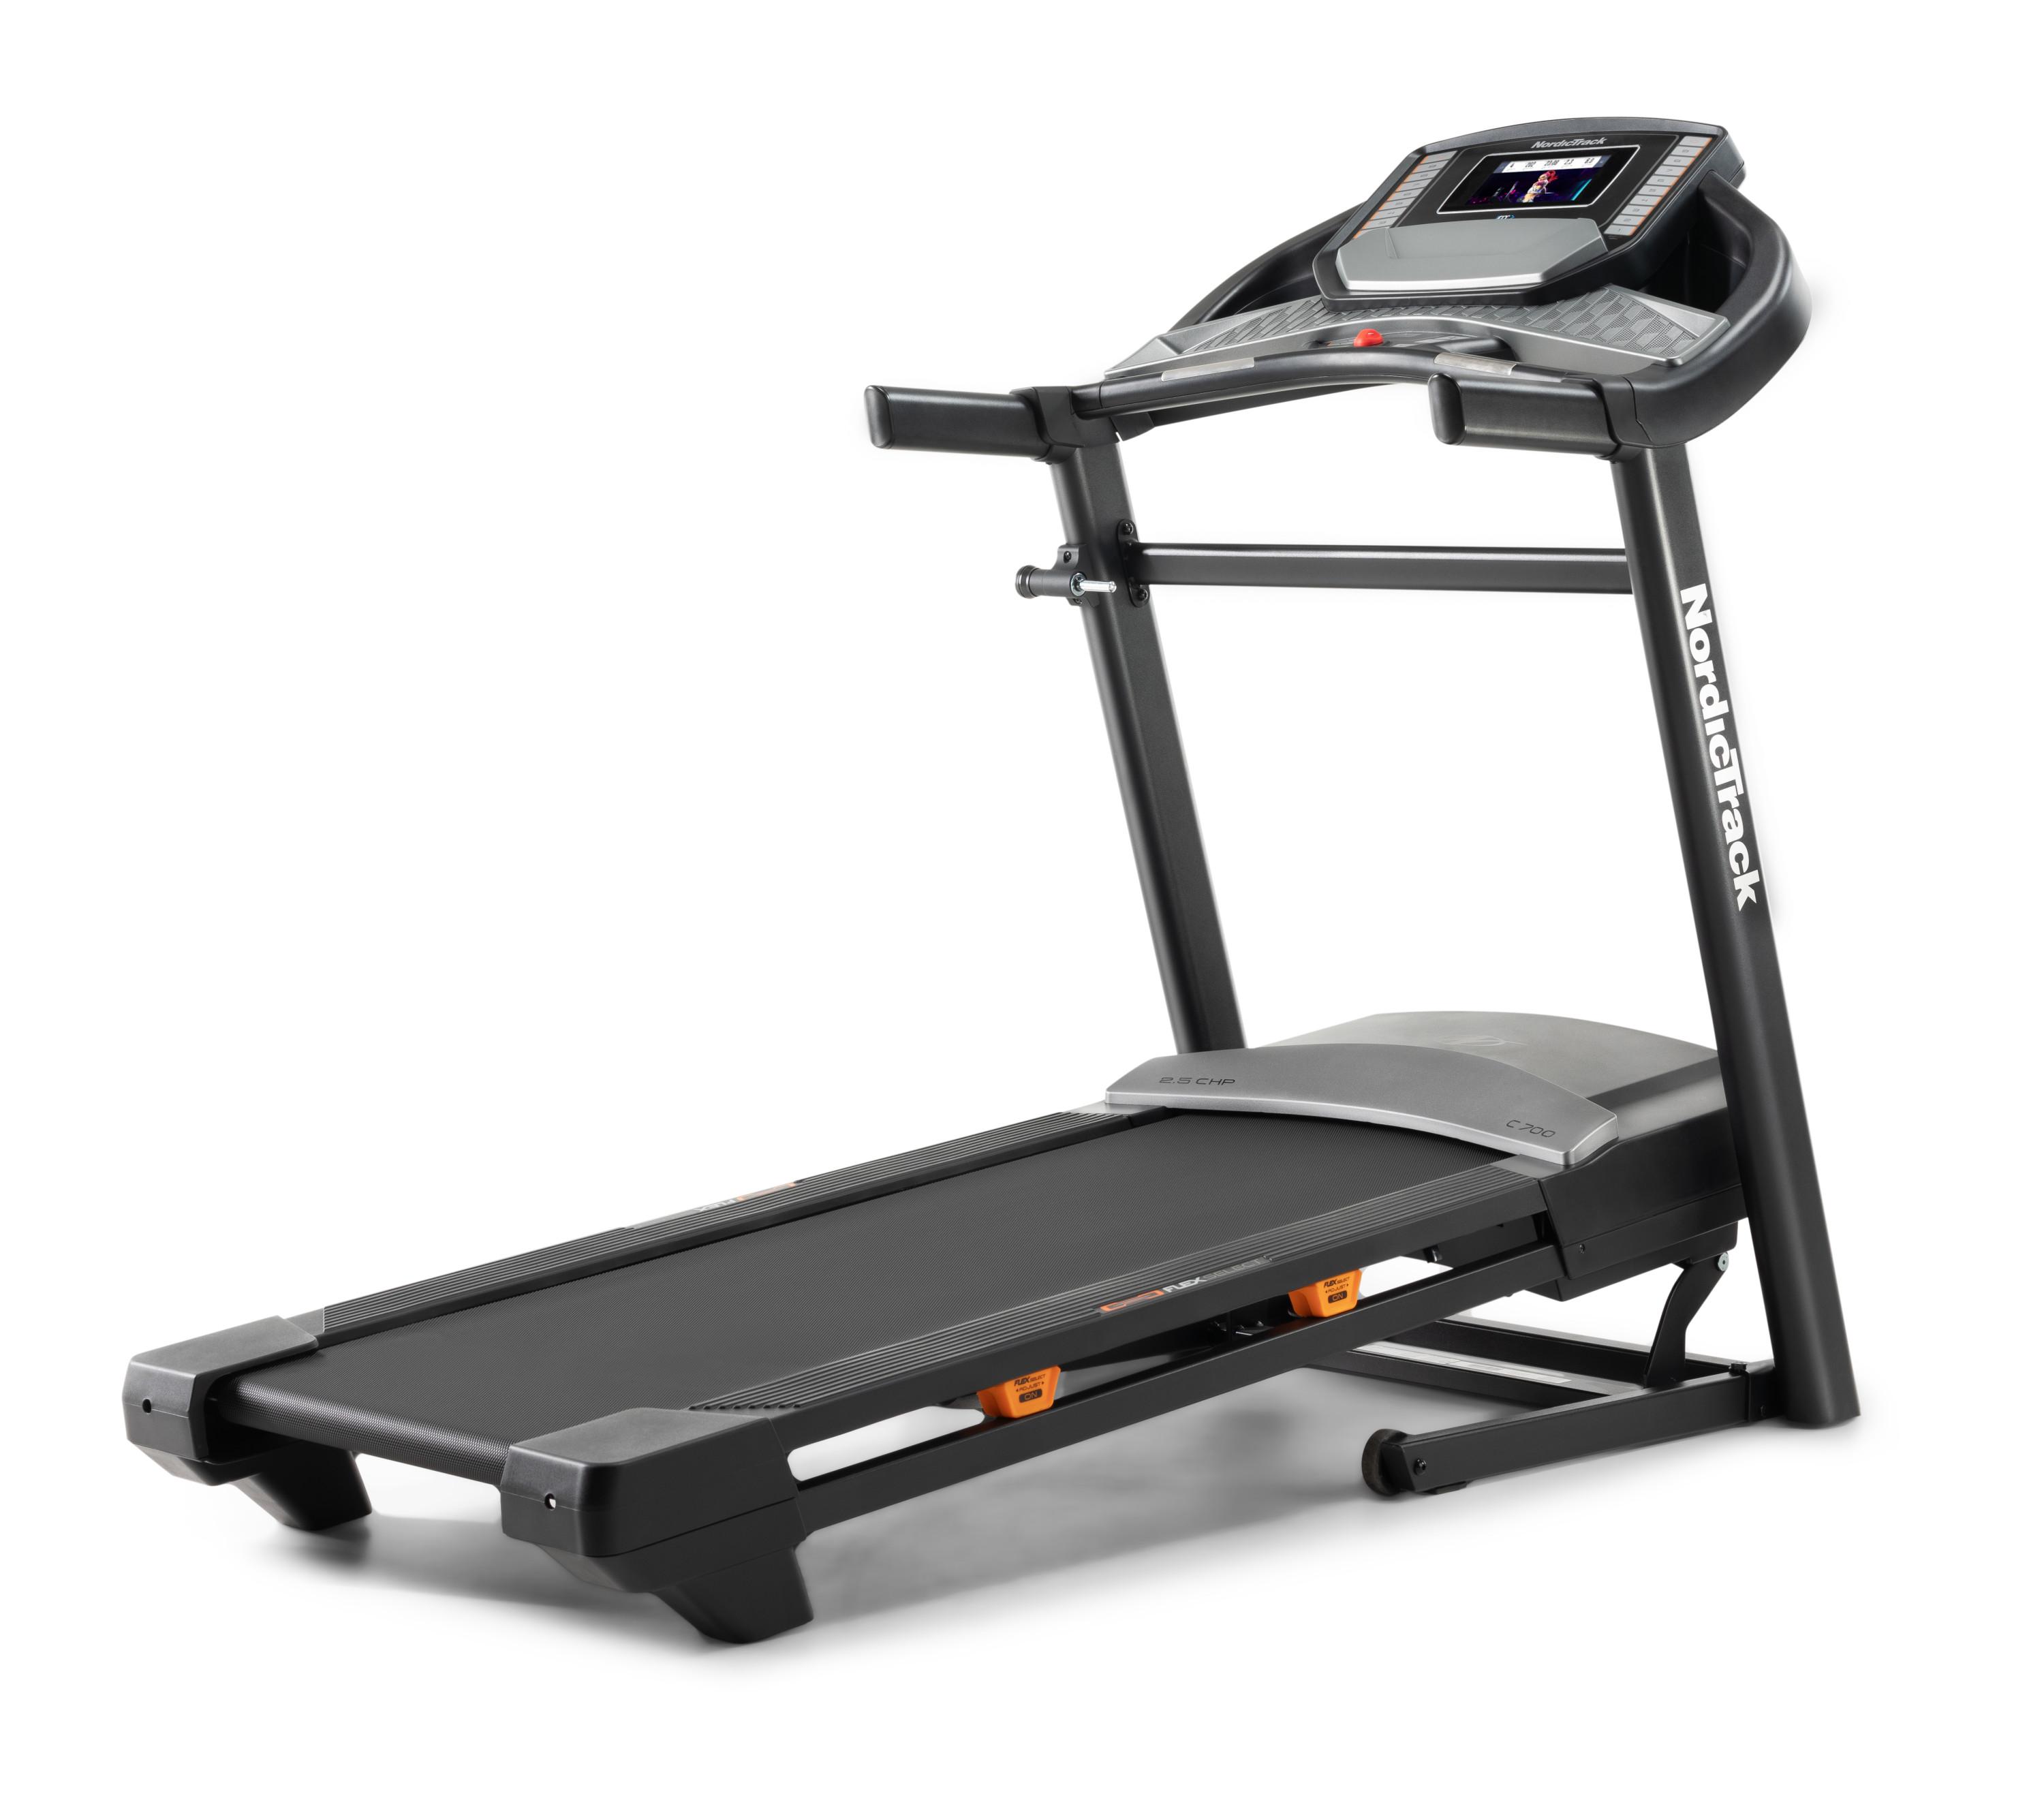 NordicTrack C700 Folding Treadmill for $666 Shipped